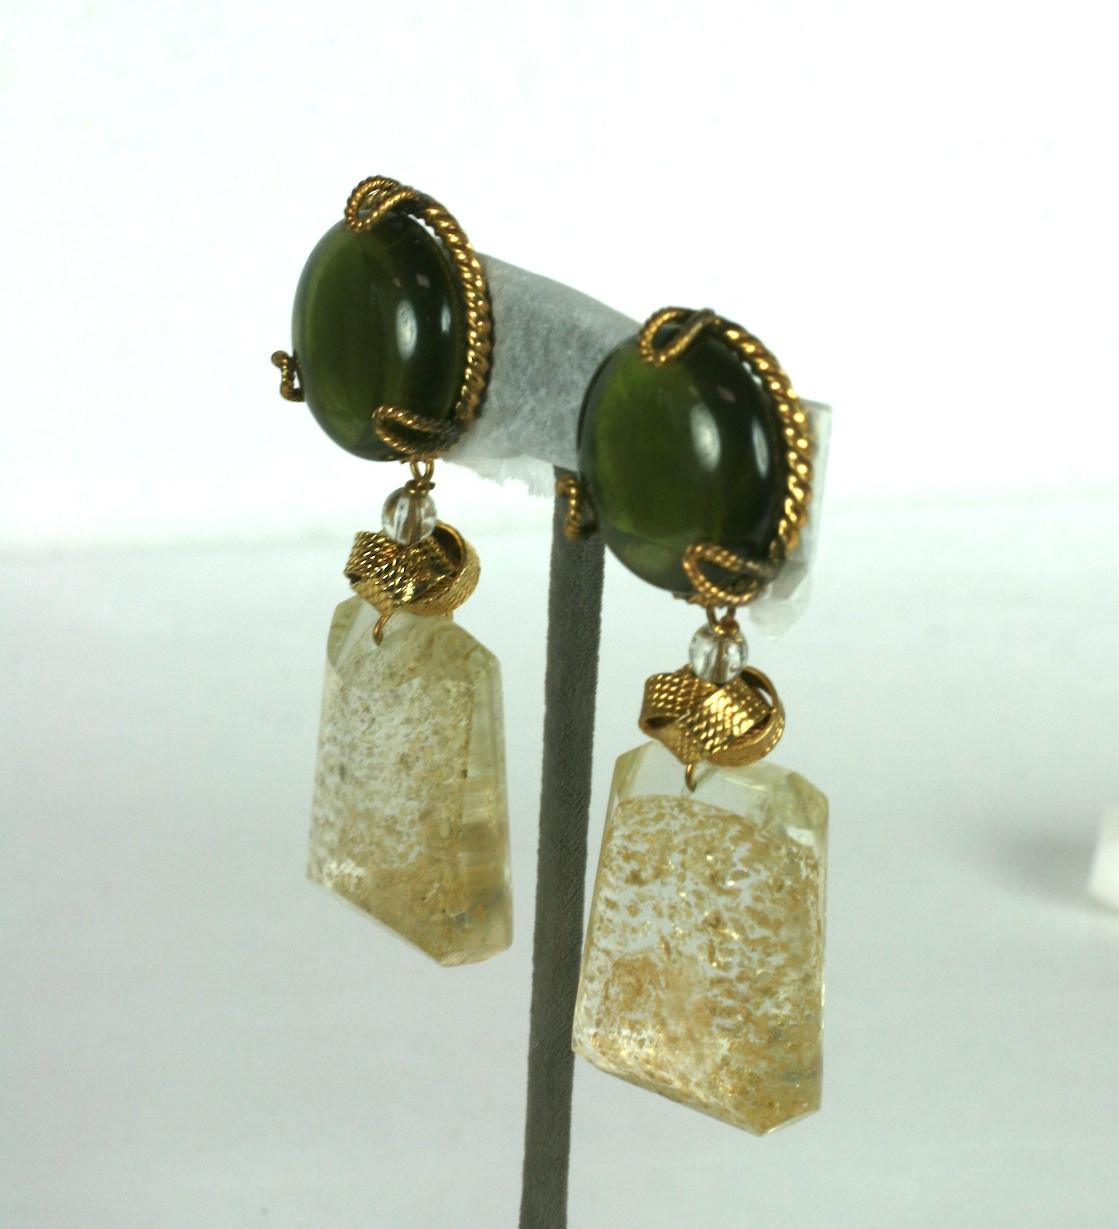 Yves Saint Laurent Haute Couture Chinese Collection ear clips  Of olive pate de verre with gold flecked quartz with gilt bronze knot and twisted wire surround. Clip back fittings.
Unsigned Haute Couture YSL. 
Excellent Condition
Length  3